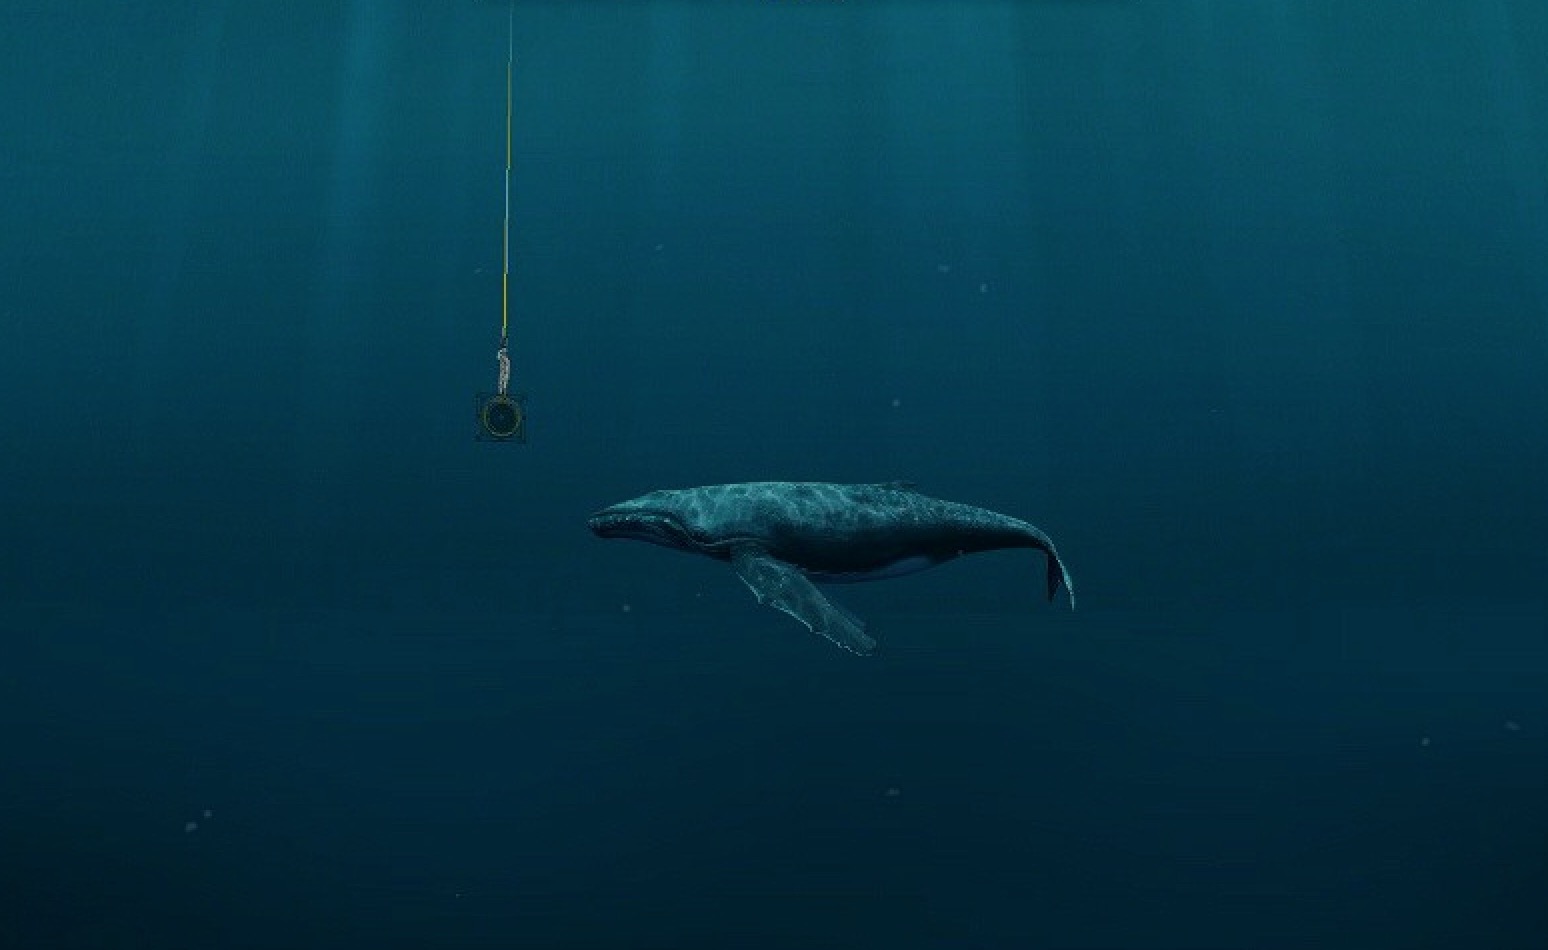 The whale song.. An invitation to watch, see and feel